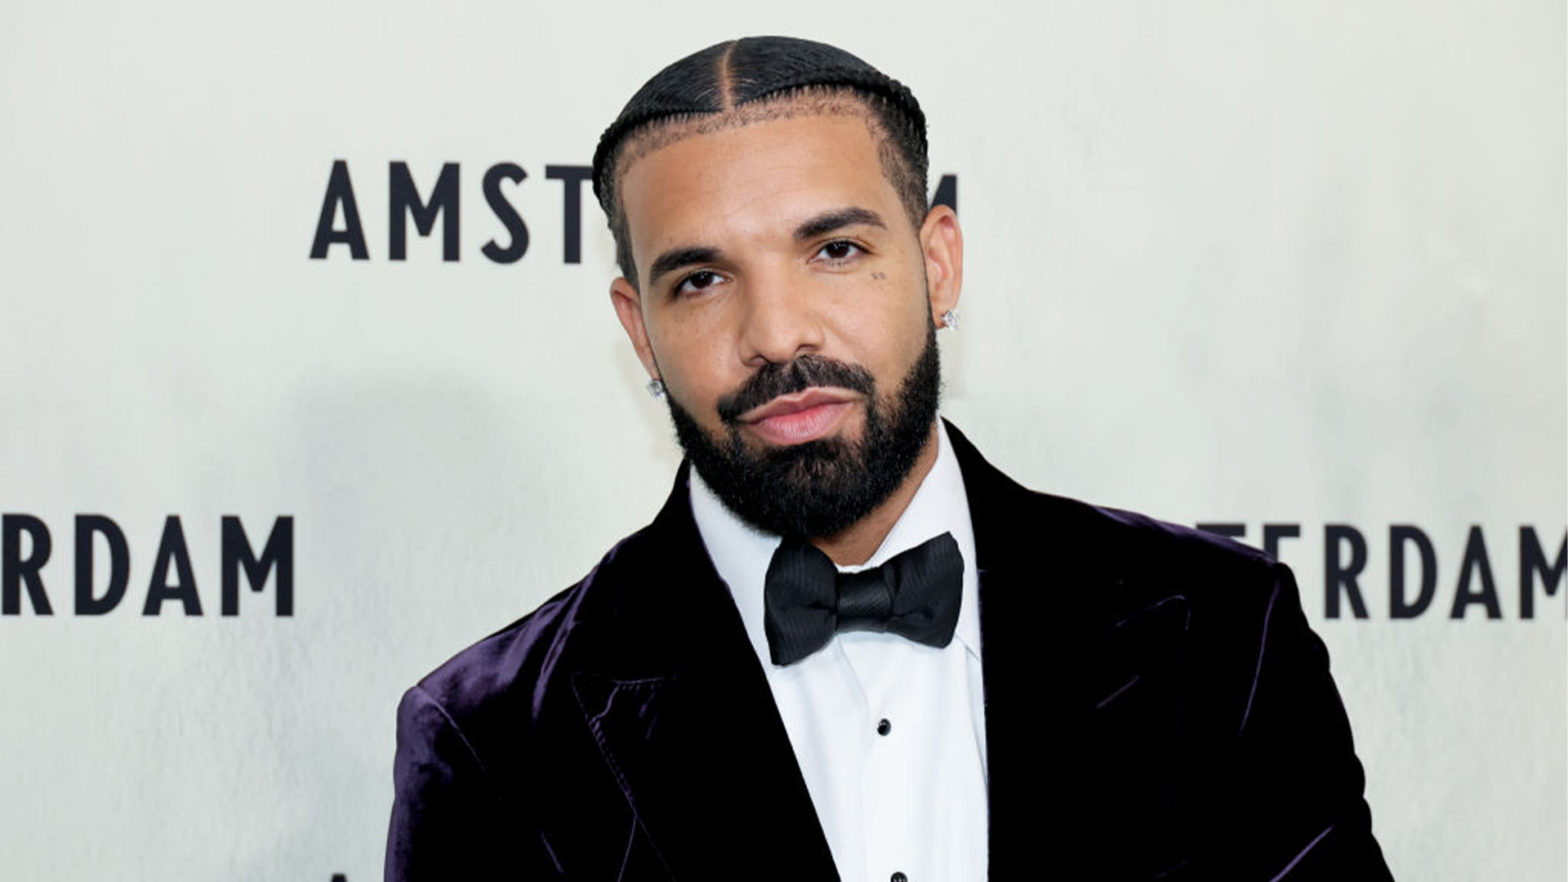 Drake Shares That He Was Once Paid $100 For A Show, Tells Aspiring Artists To 'Keep Going'